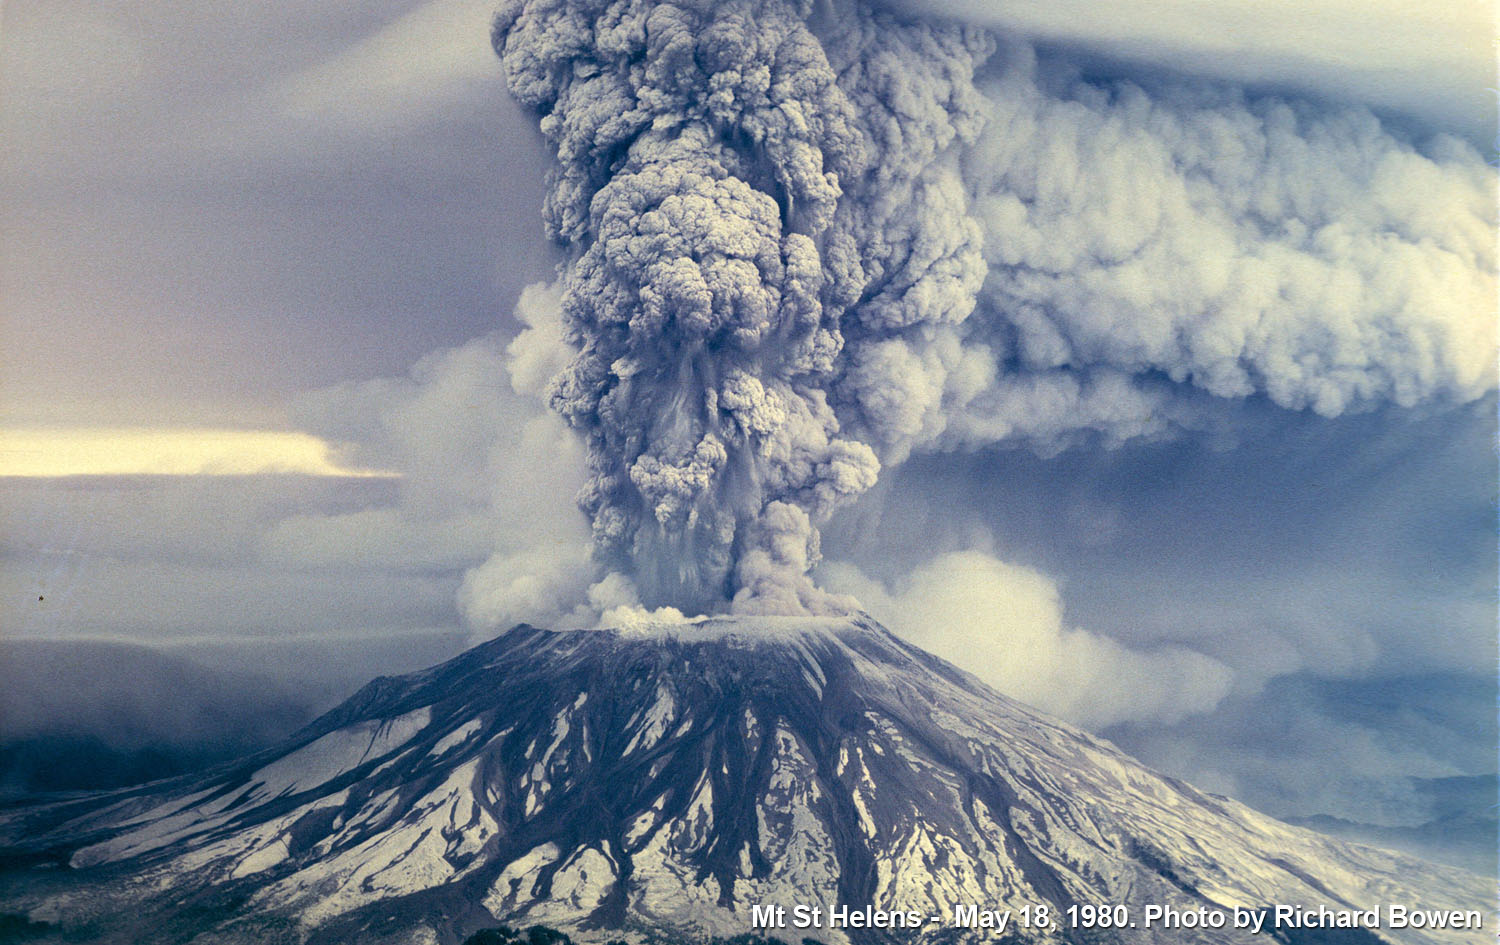 US Passenger Vehicle Emissions Comparable to 1980 Mt. St Helens